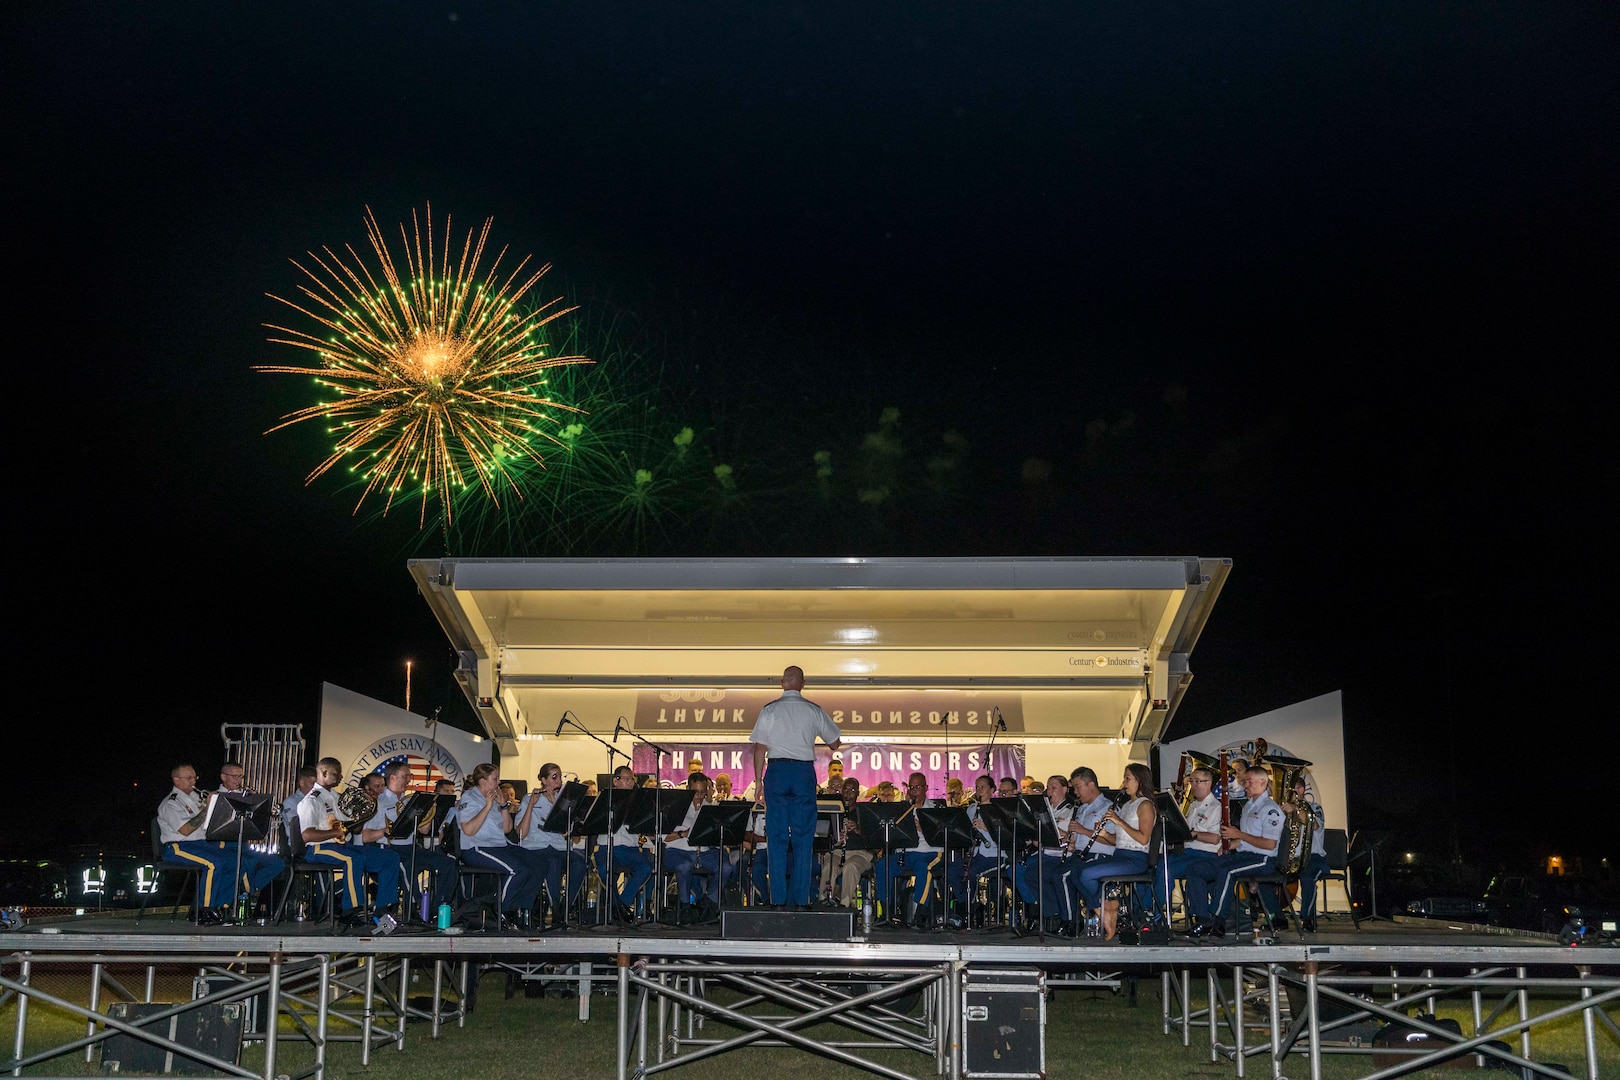 The 323d Army Band “Fort Sam’s Own” performs with the Band of the West during the annual Military Appreciation Weekend May 6, 2017 at Joint Base San Antonio-Fort Sam Houston, Texas. U.S. U.S. Army North and JBSA hosted the two-day event, which featured music, family activities, and various military demonstrations. This year, the appreciation weekend also commemorated the 300th anniversary for the city of San Antonio. (U.S. Air Force photo by Ismael Ortega / Released)